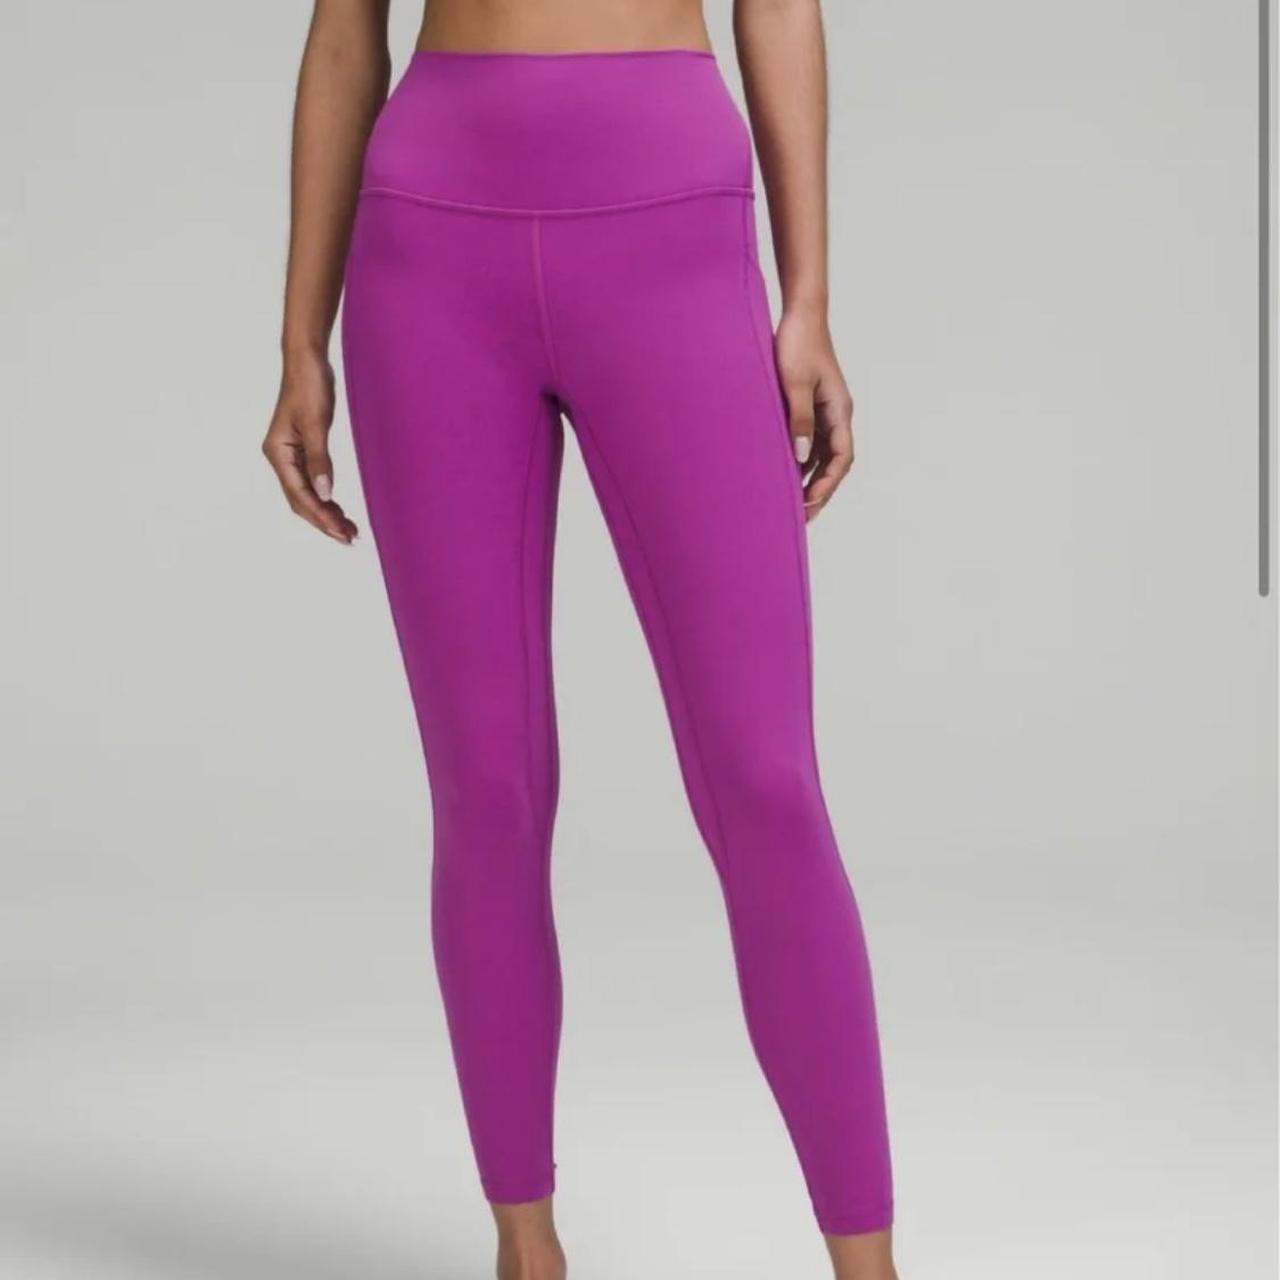 BRAND NEW lululemon Align High-Rise Pant with